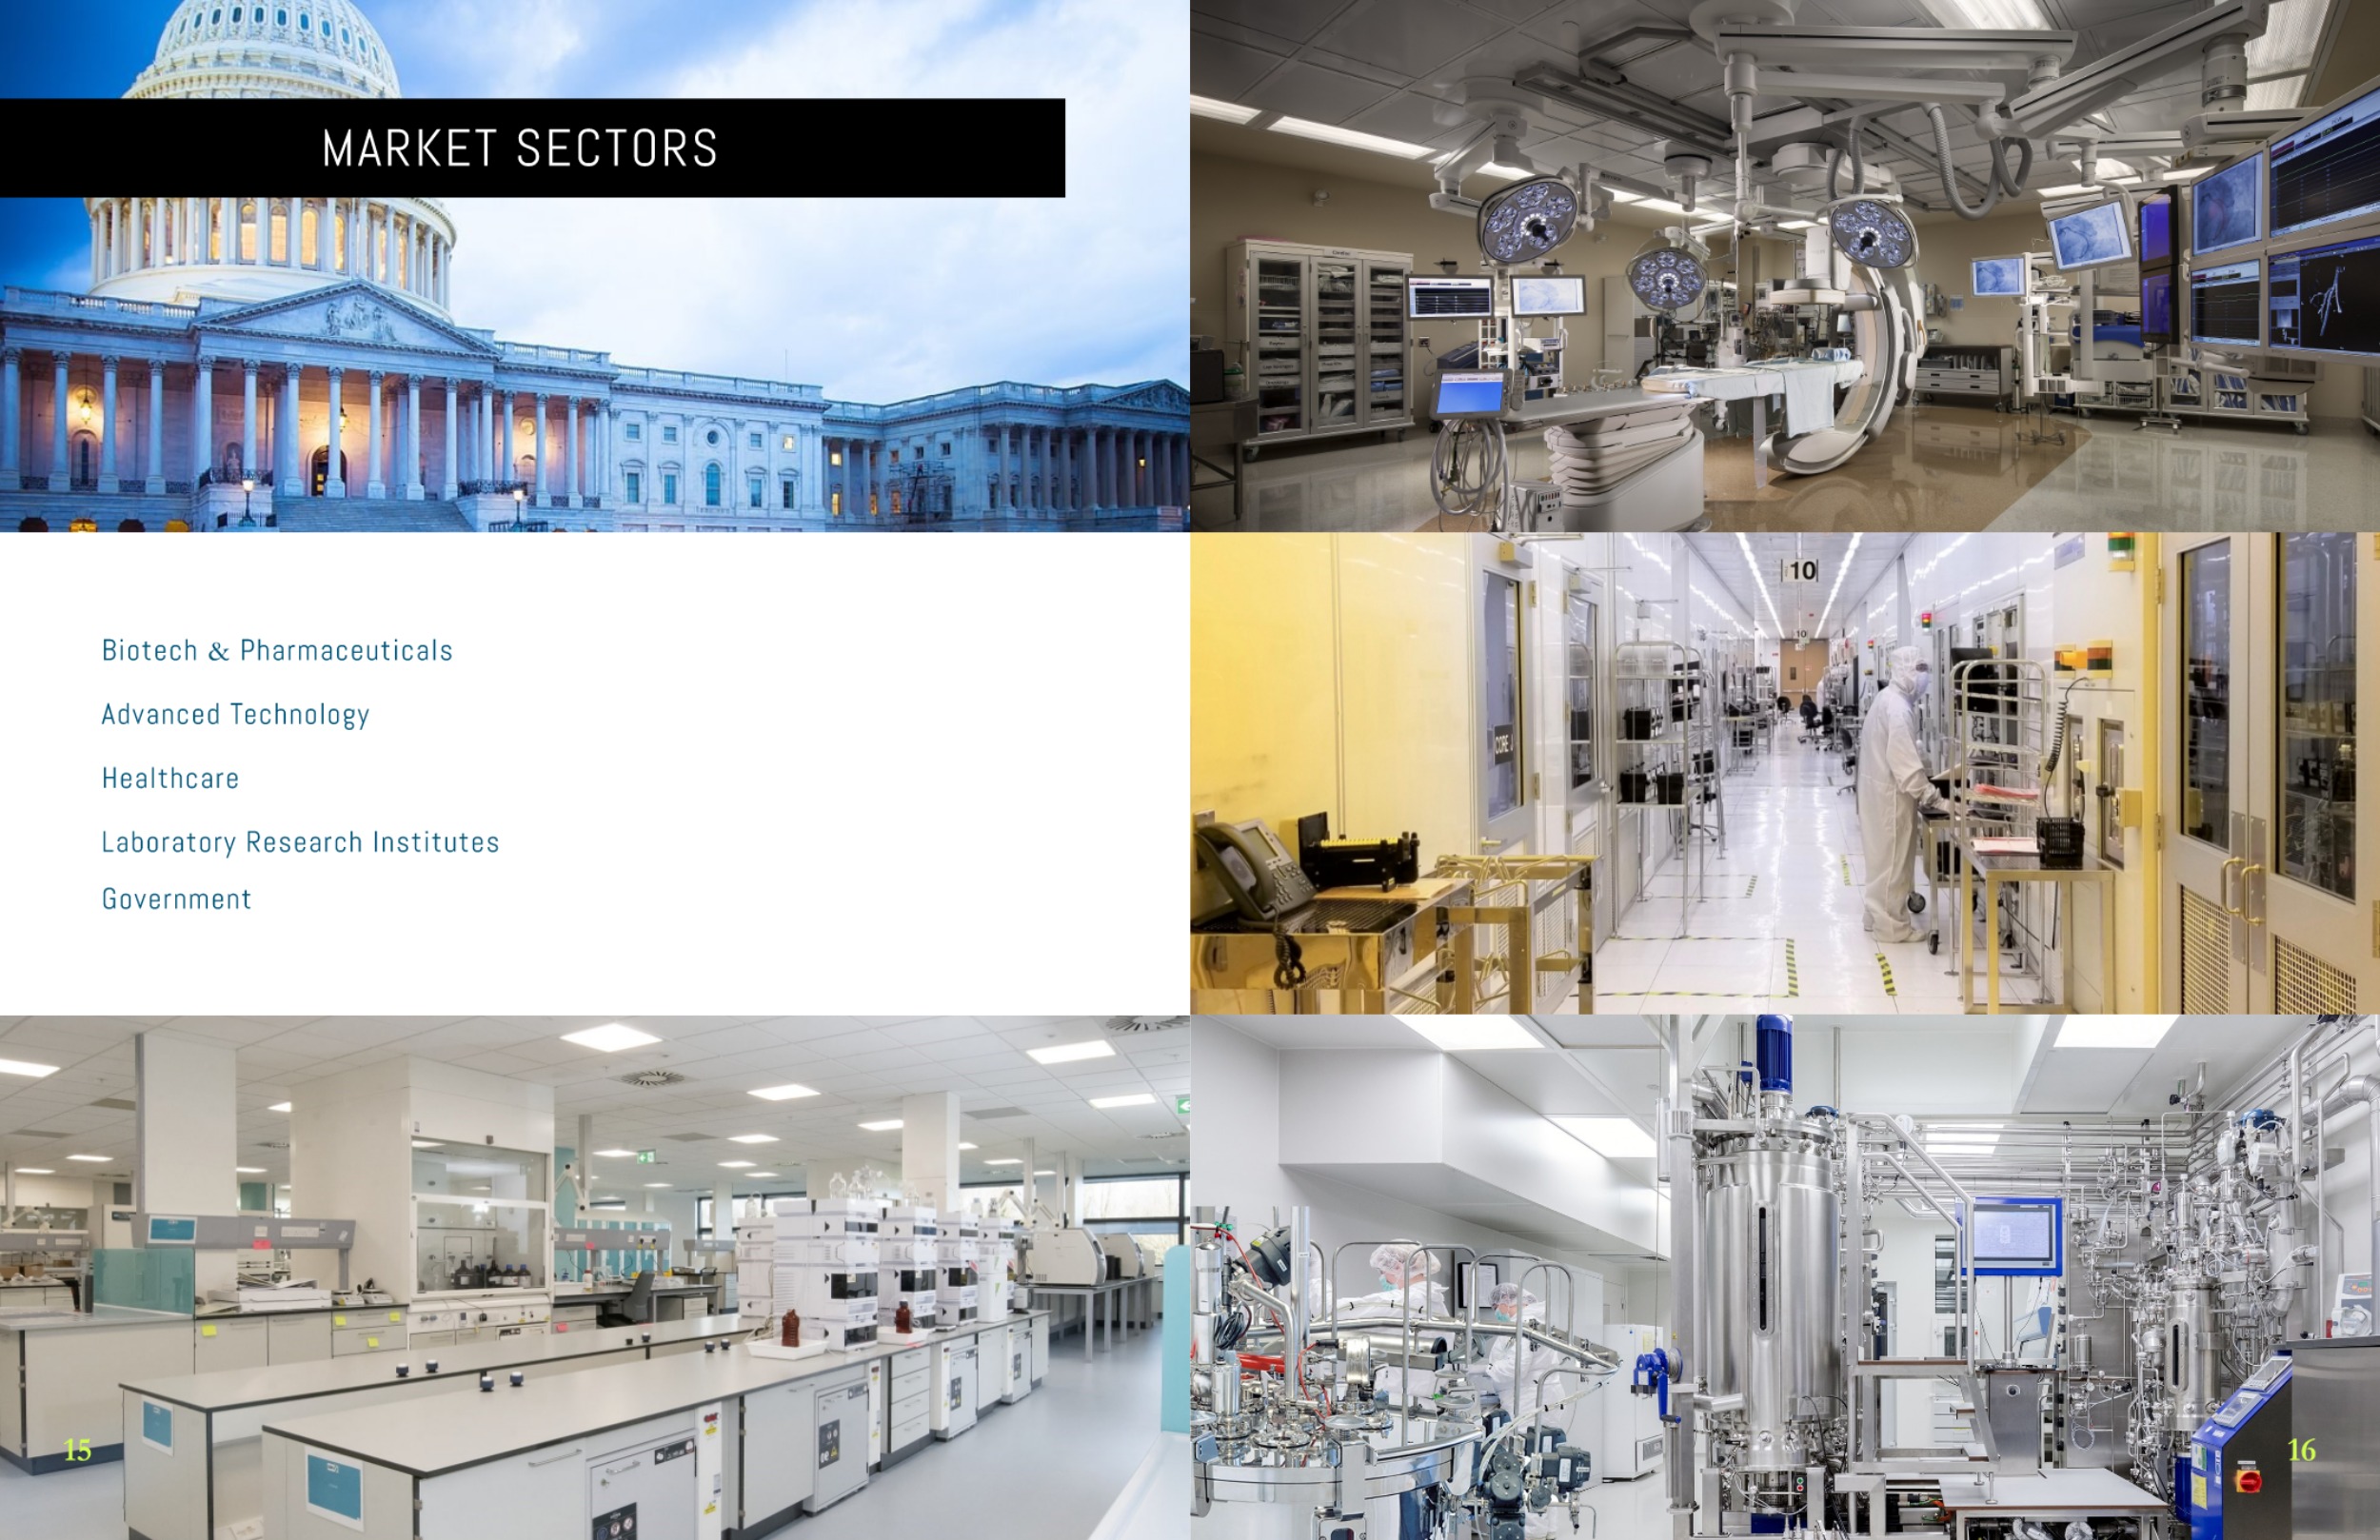 IPS Capabilities Booklet spread for Market Sectors including Biotech & Pharmaceuticals, Advanced Technology, Healthcare, Laboratory Research Institutes, and Government.